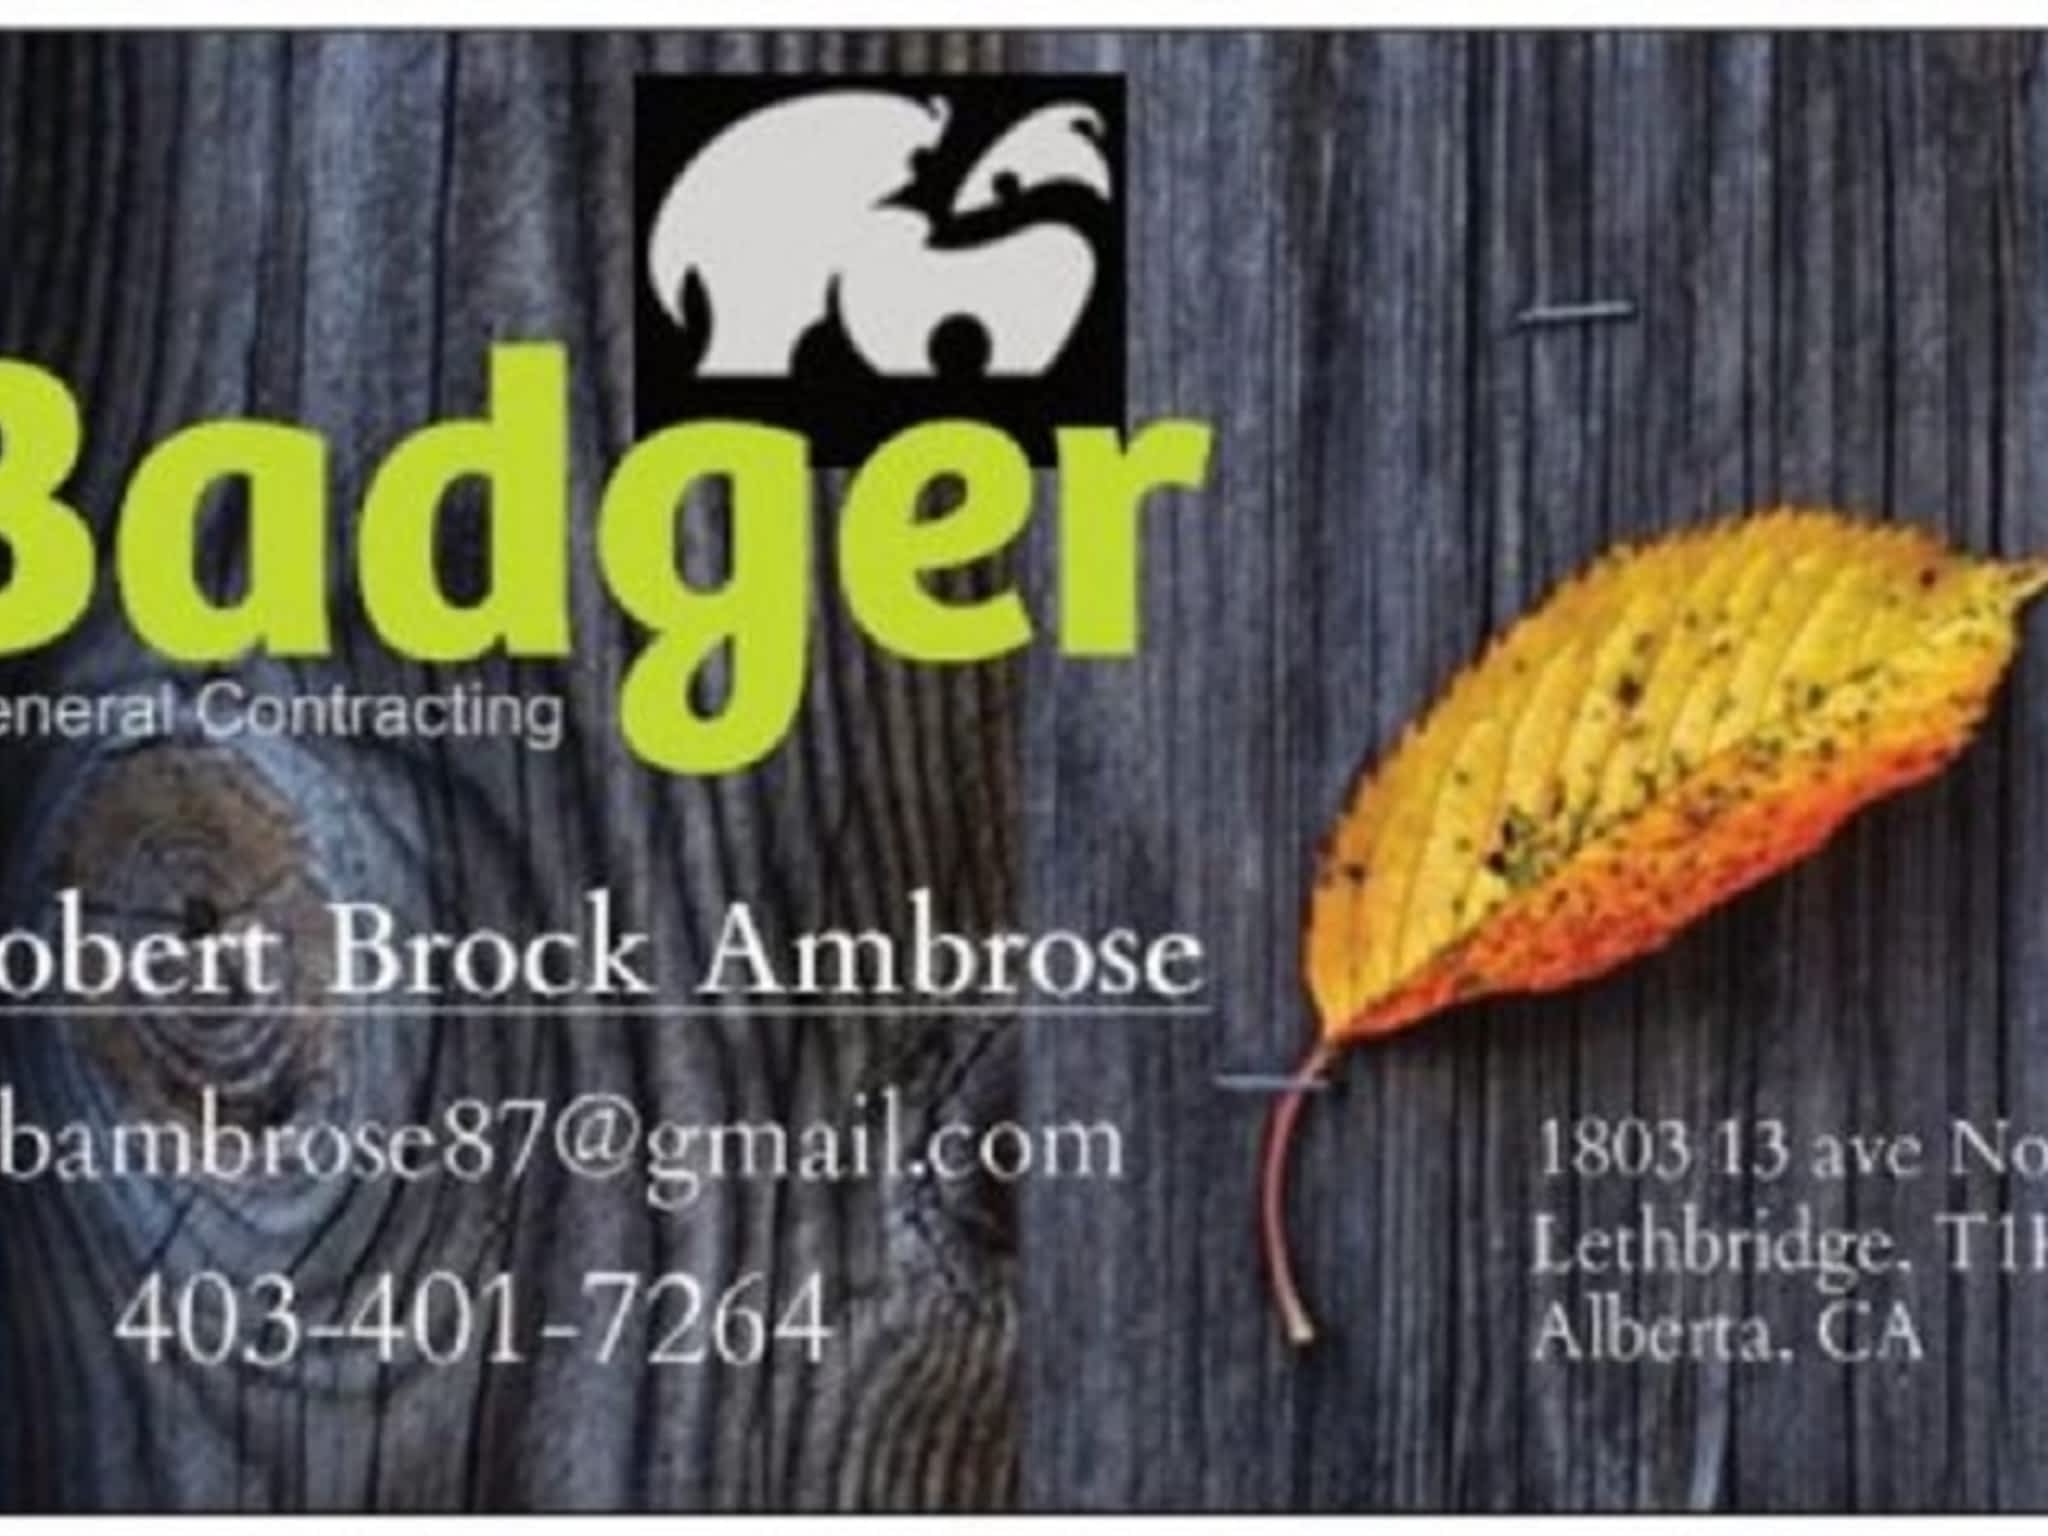 photo Badger General Contracting